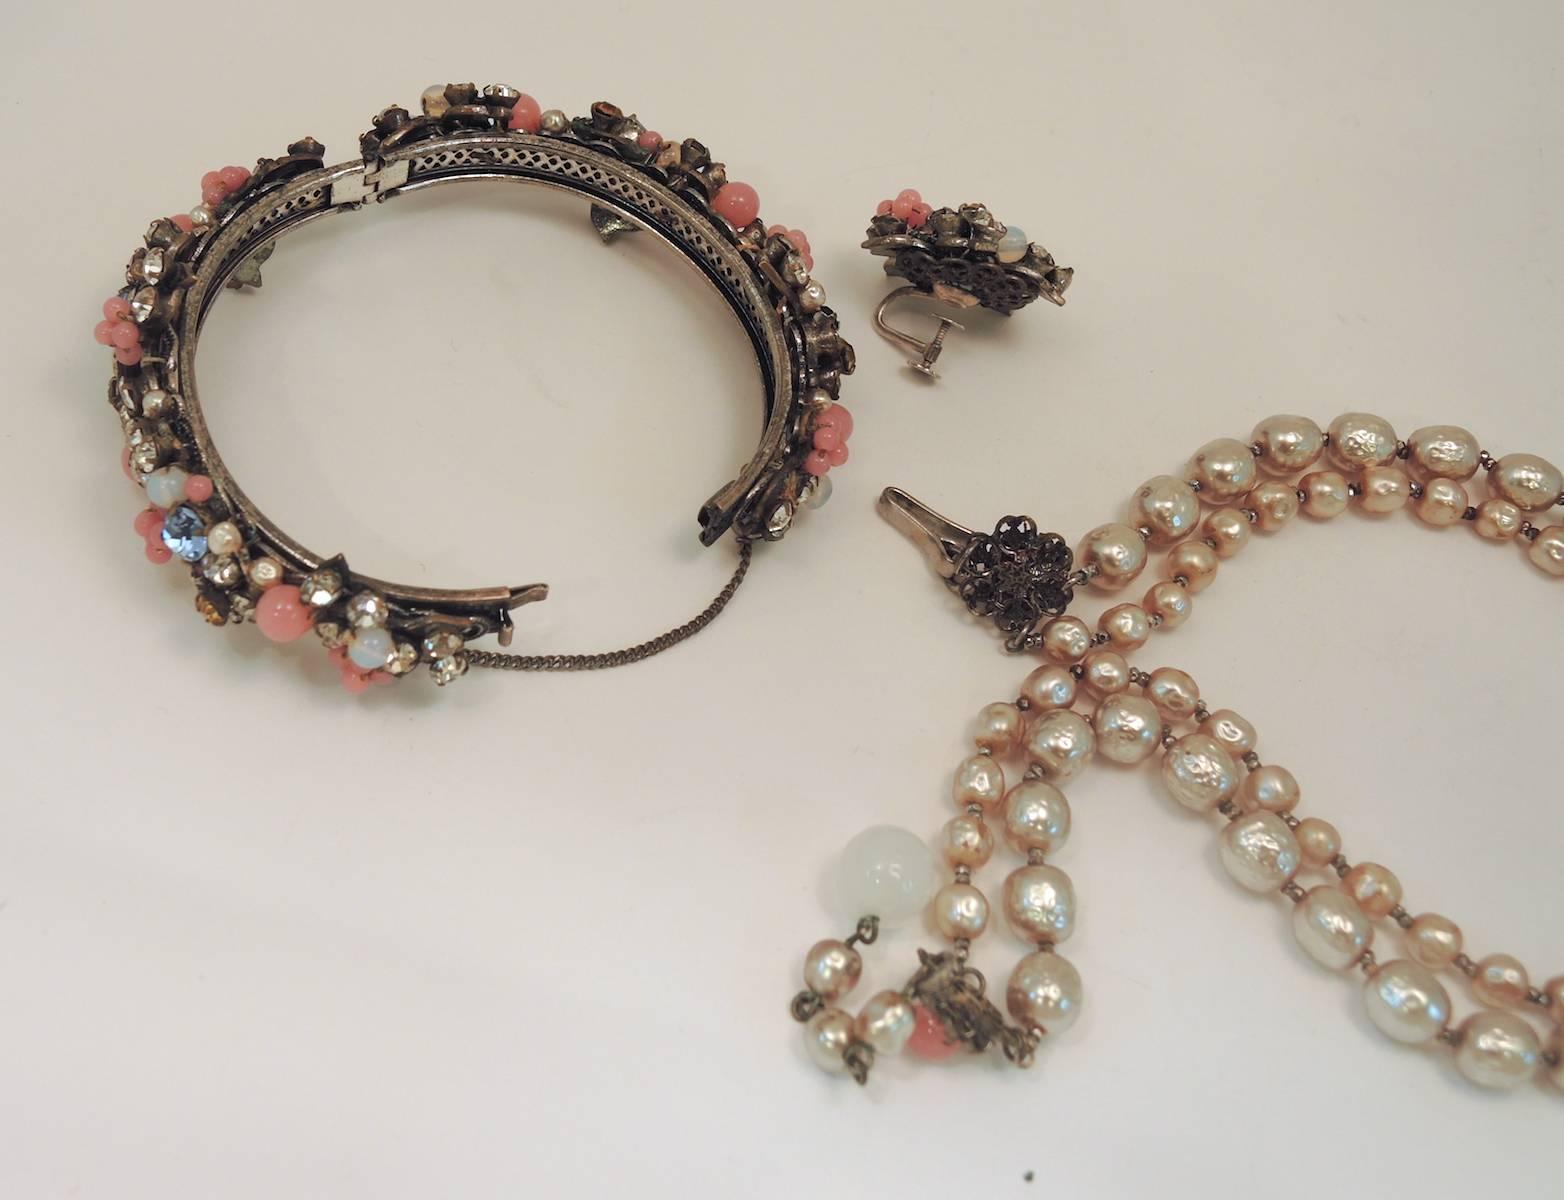 Women's Vintage Miriam Haskell 1940s Pink Floral & Faux Pearl Parure